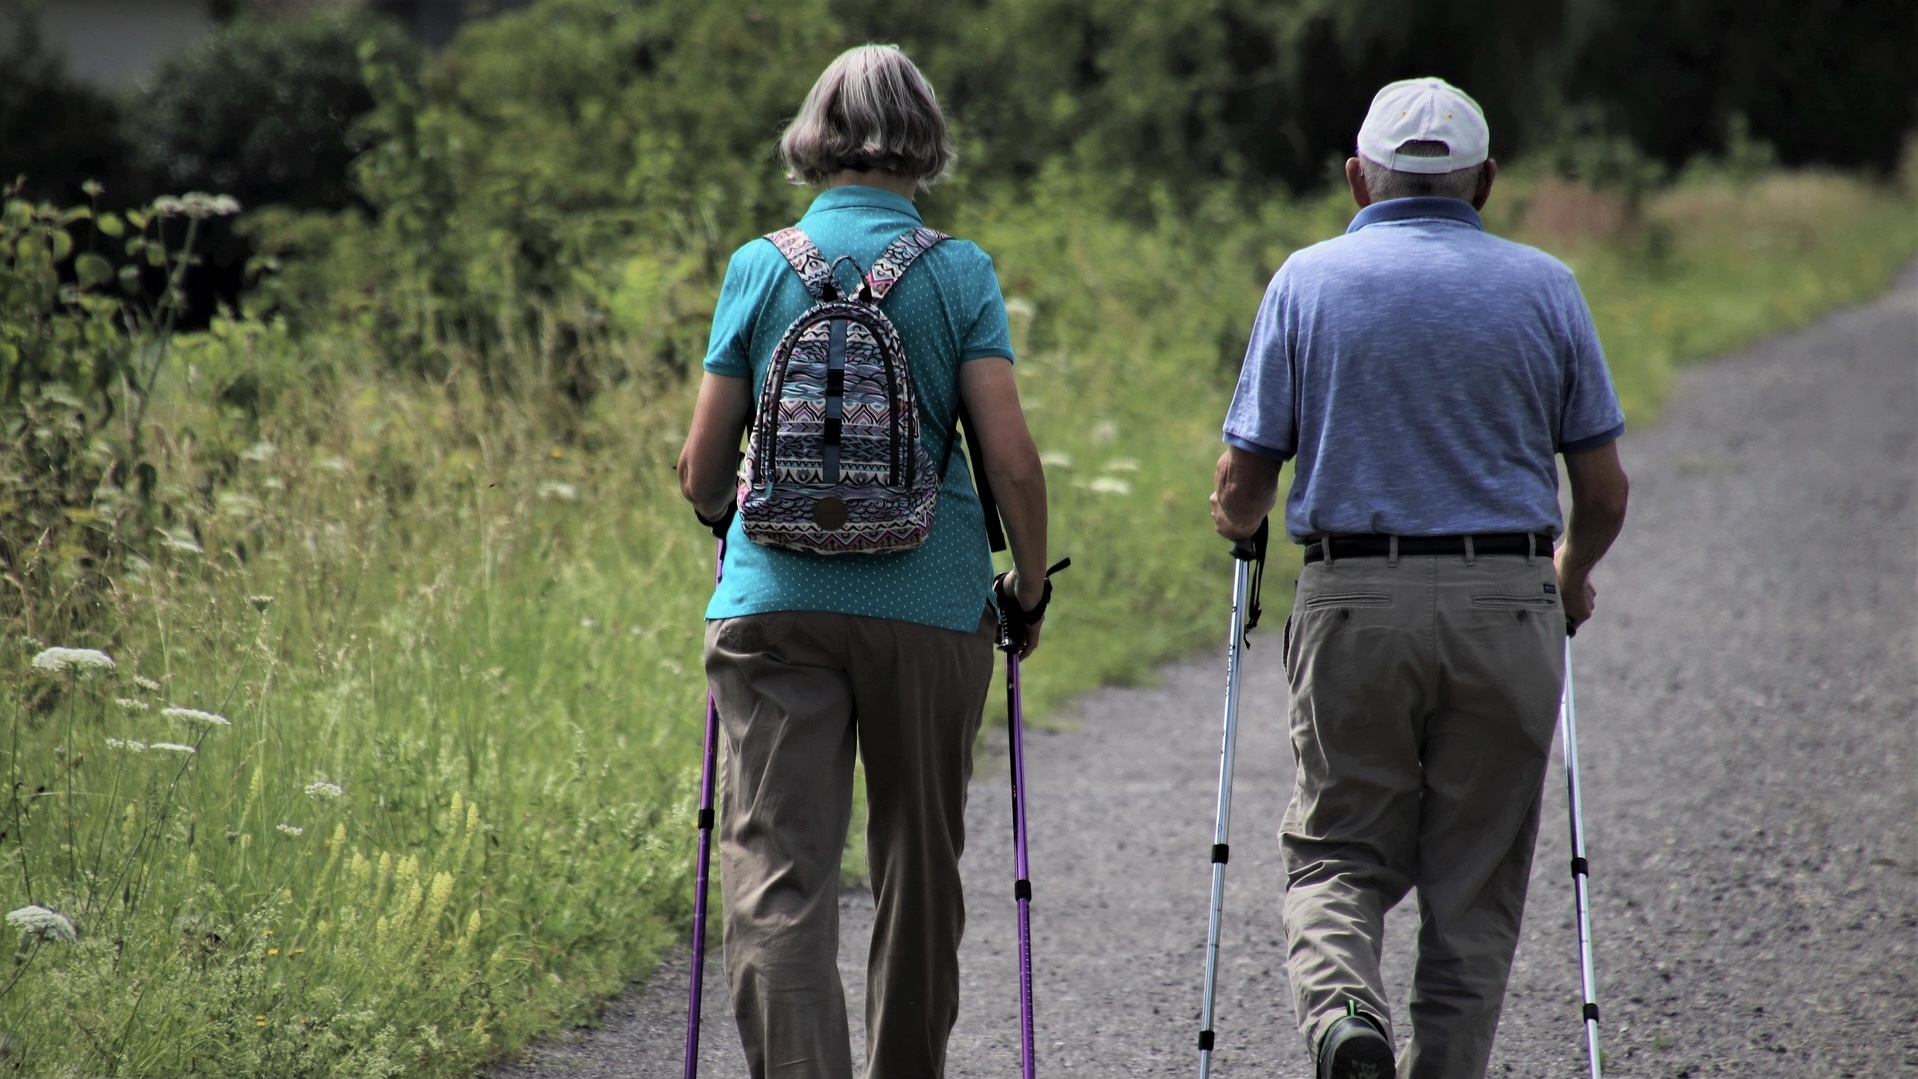 SENIORS ENGAGE AT GRAND JUNCTION BY WALKING 5500 MILES IN 2020